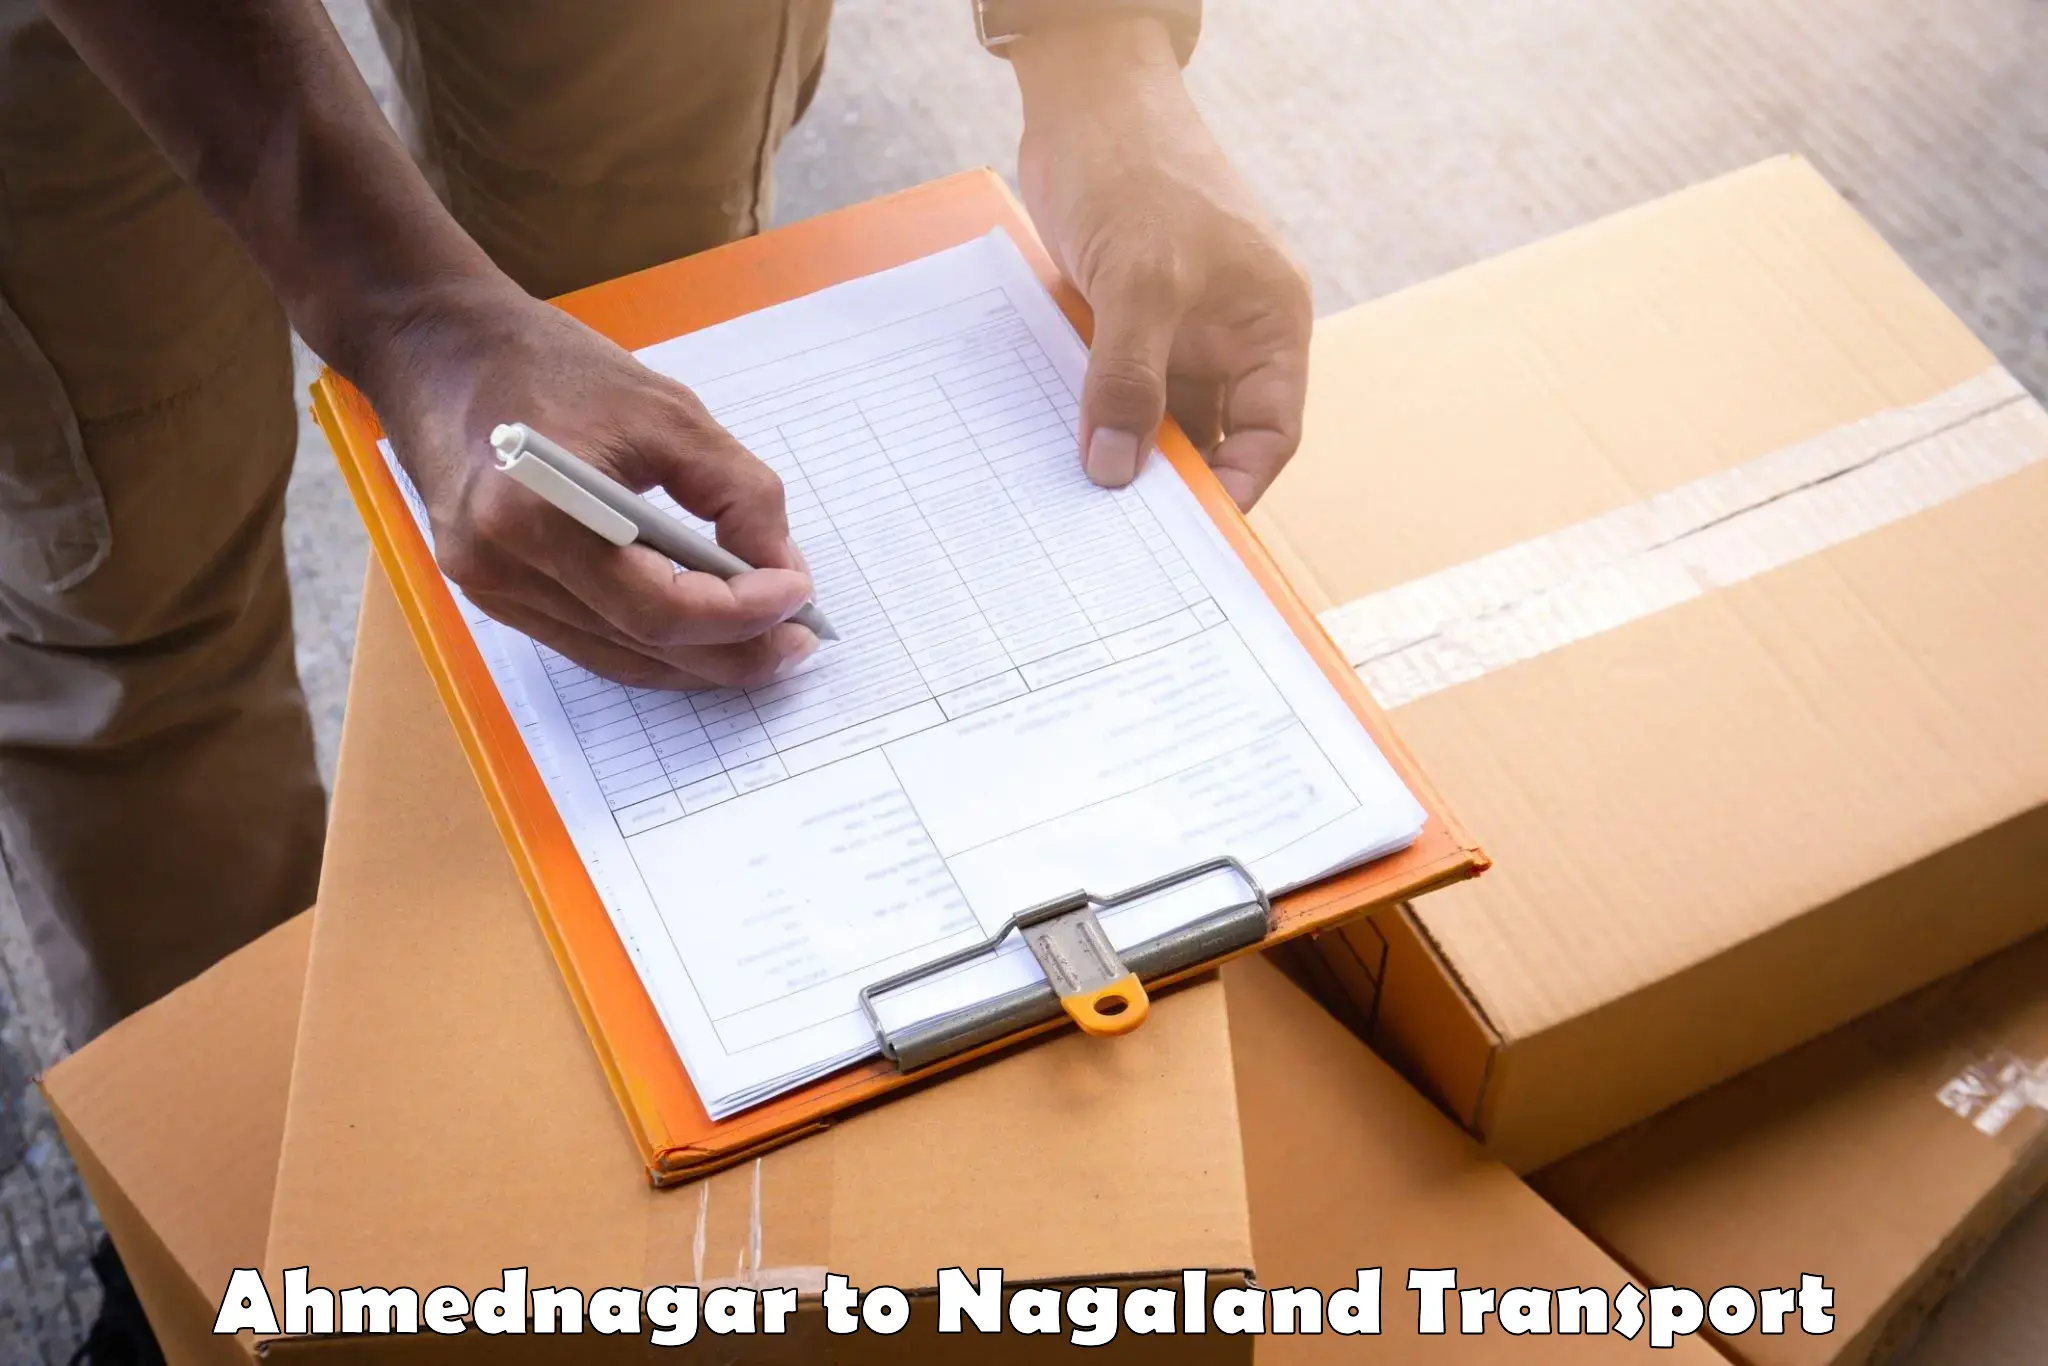 Container transport service Ahmednagar to Nagaland